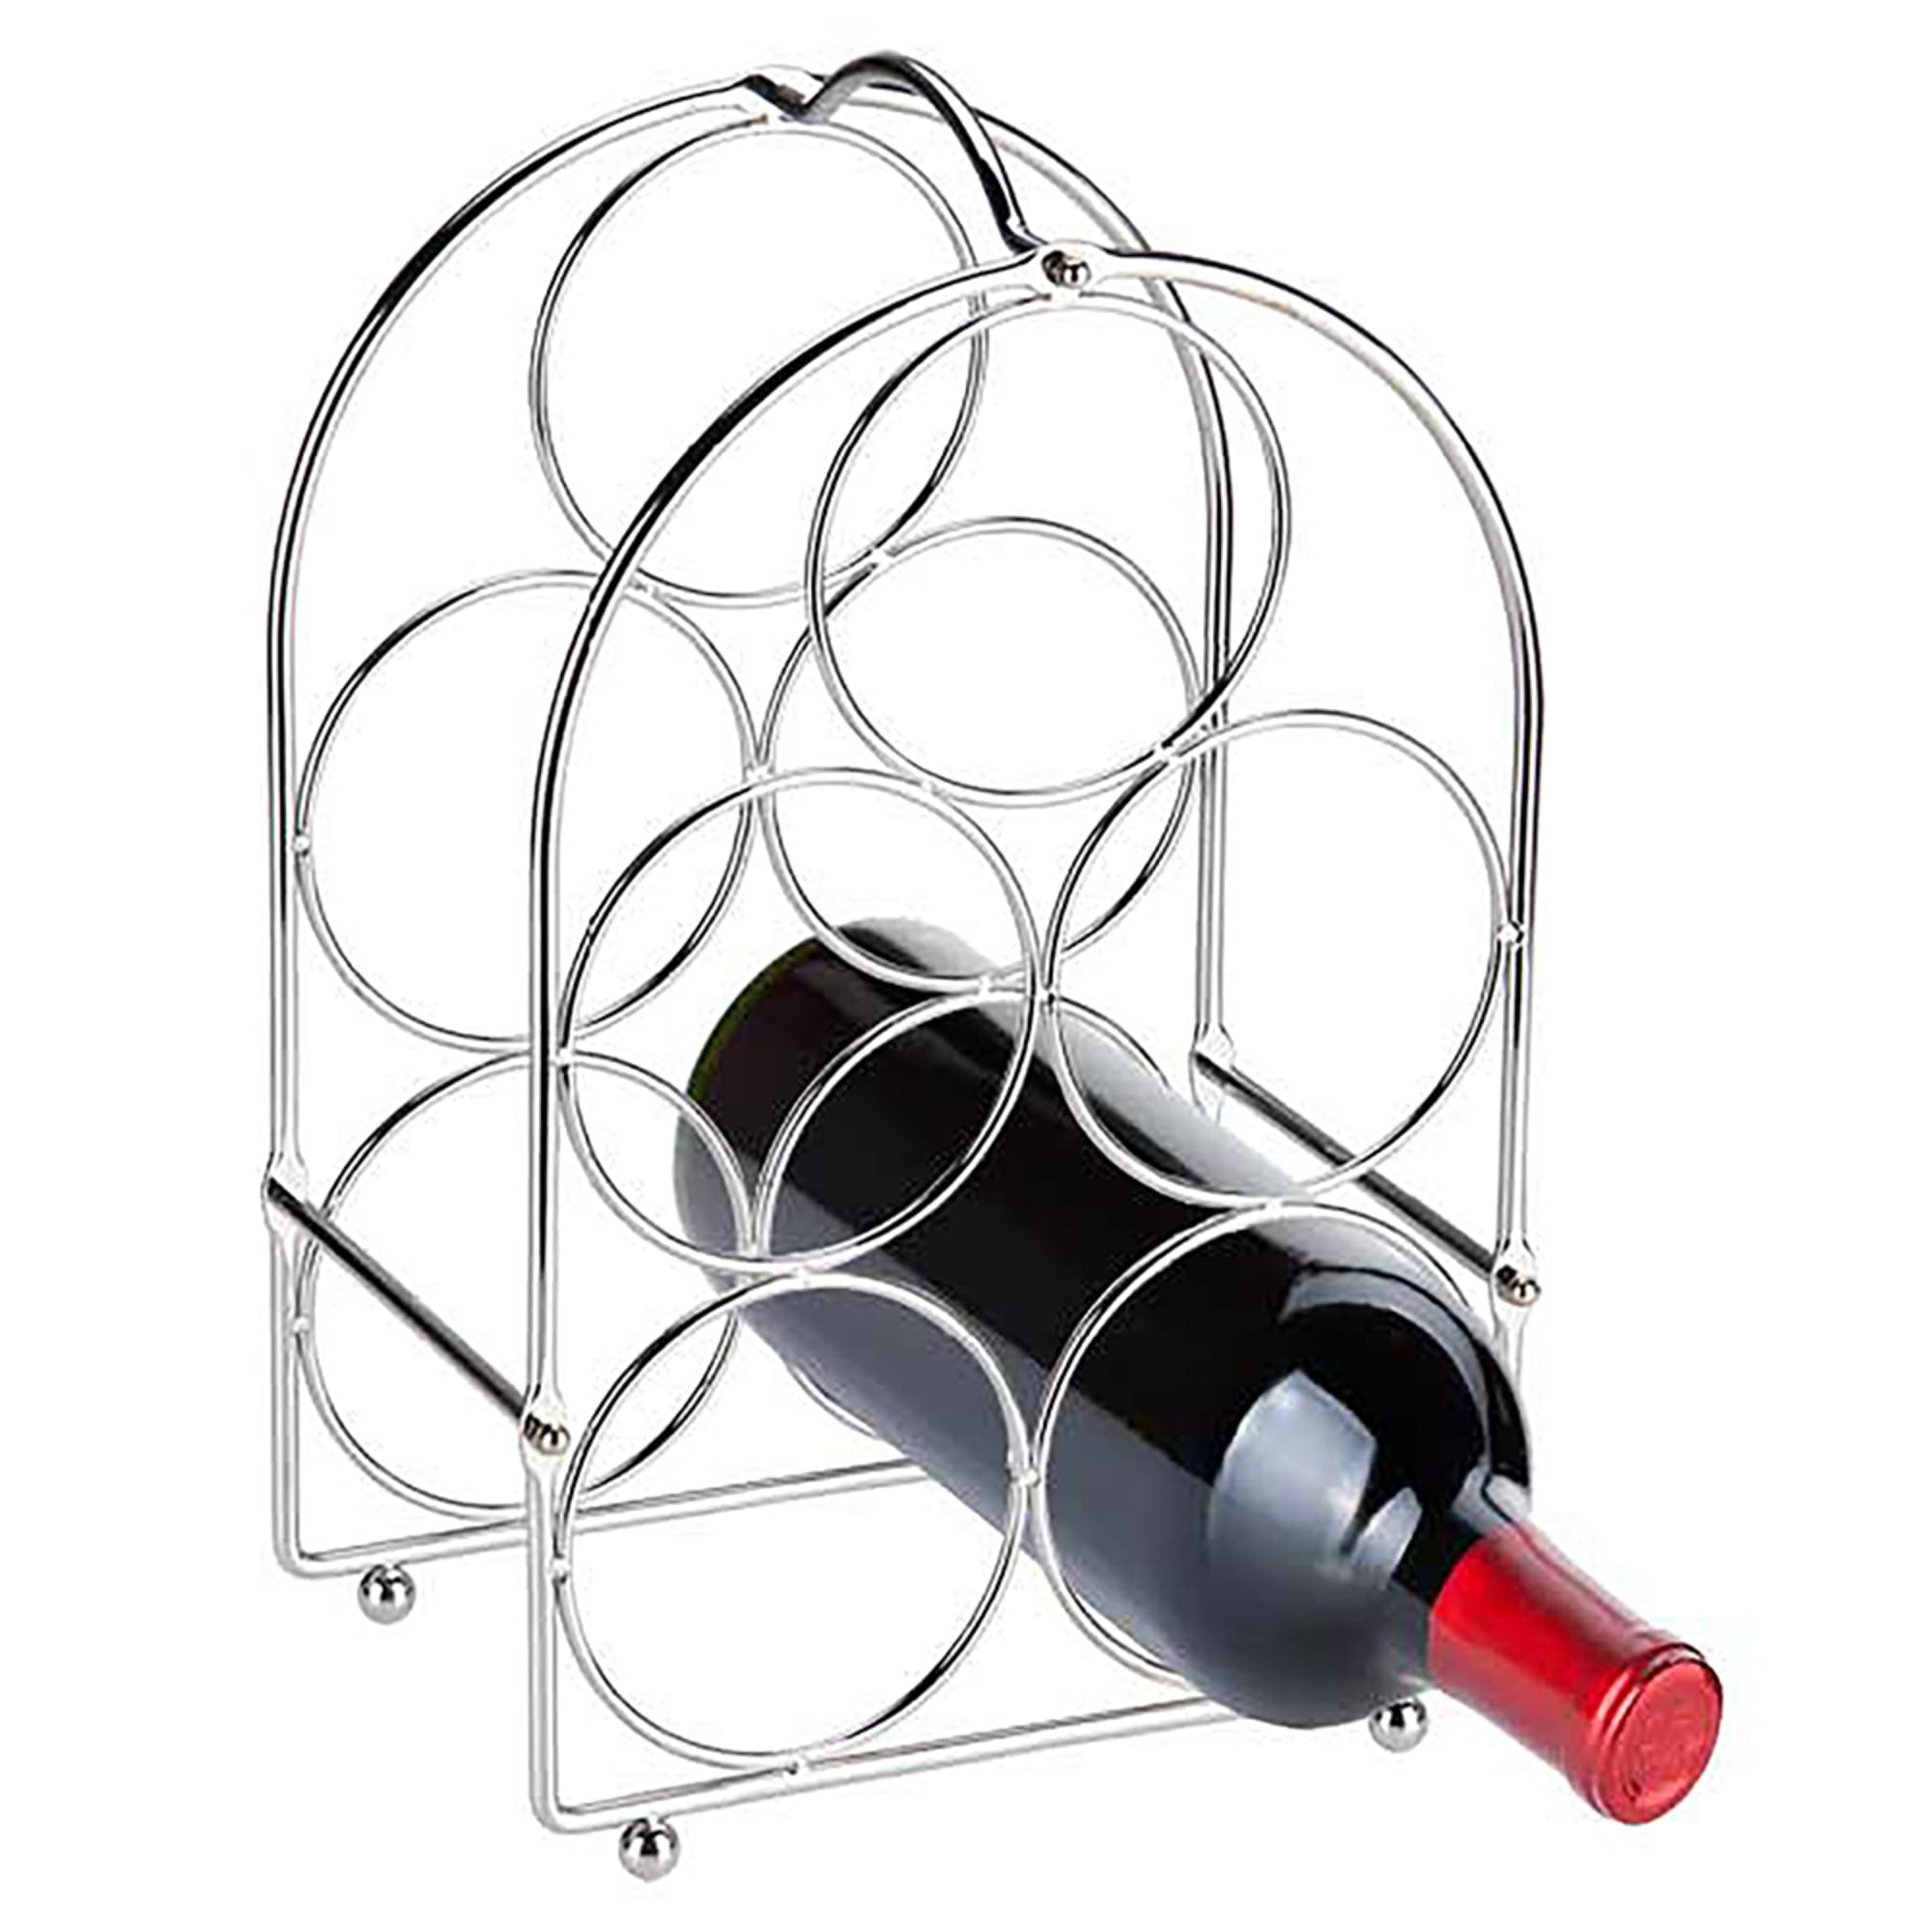 Michael Graves Design Deluxe Extra Large Capacity Stainless Steel Dish Rack  with Wine Glass Holder, Black, KITCHEN ORGANIZATION